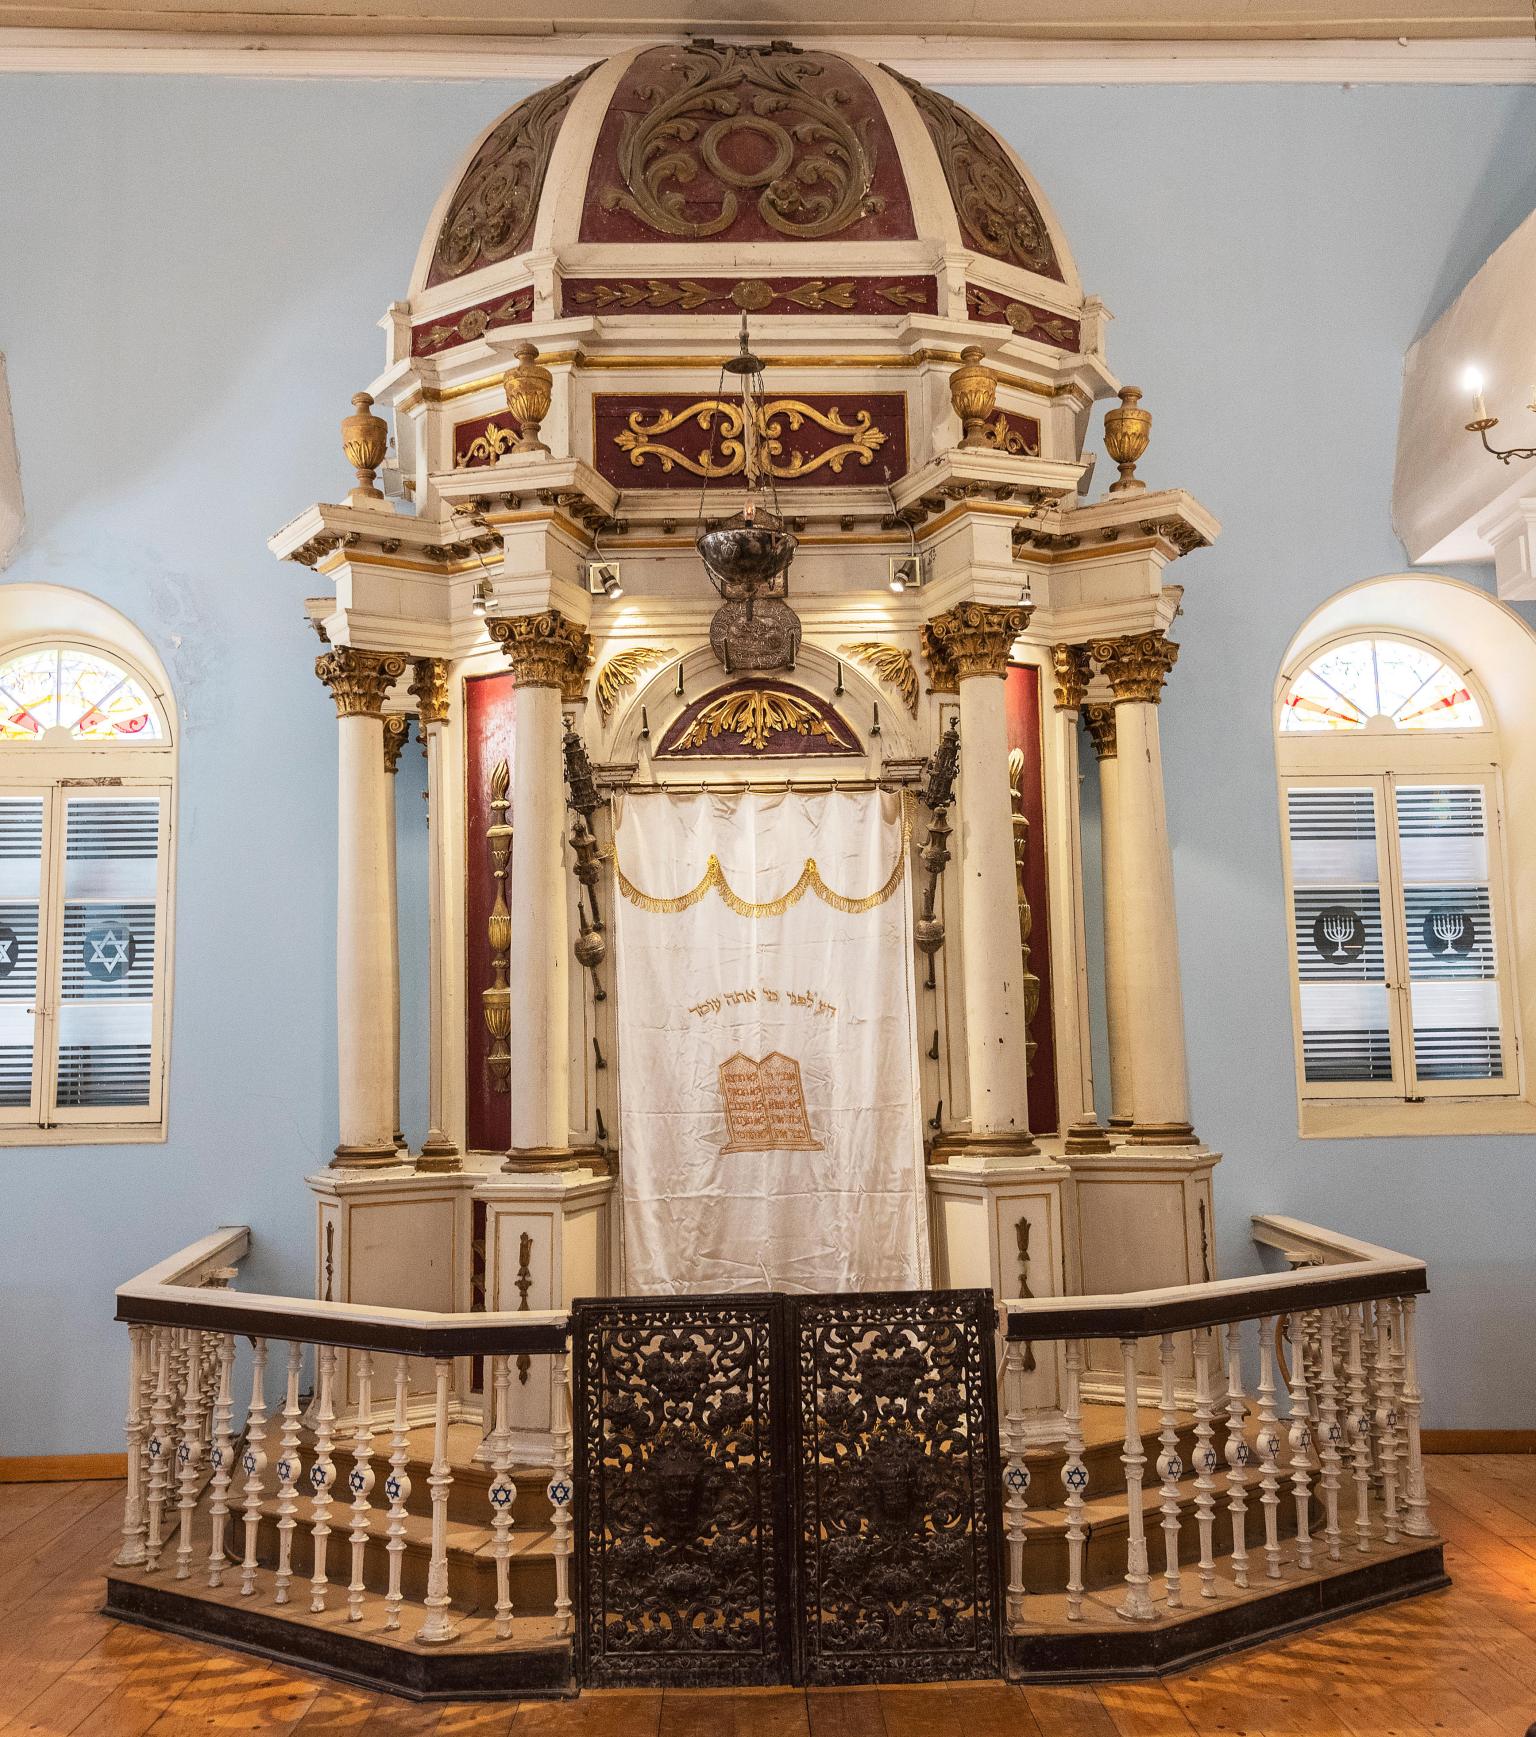 Photograph of Torah ark with domed roof surrounded by fence.